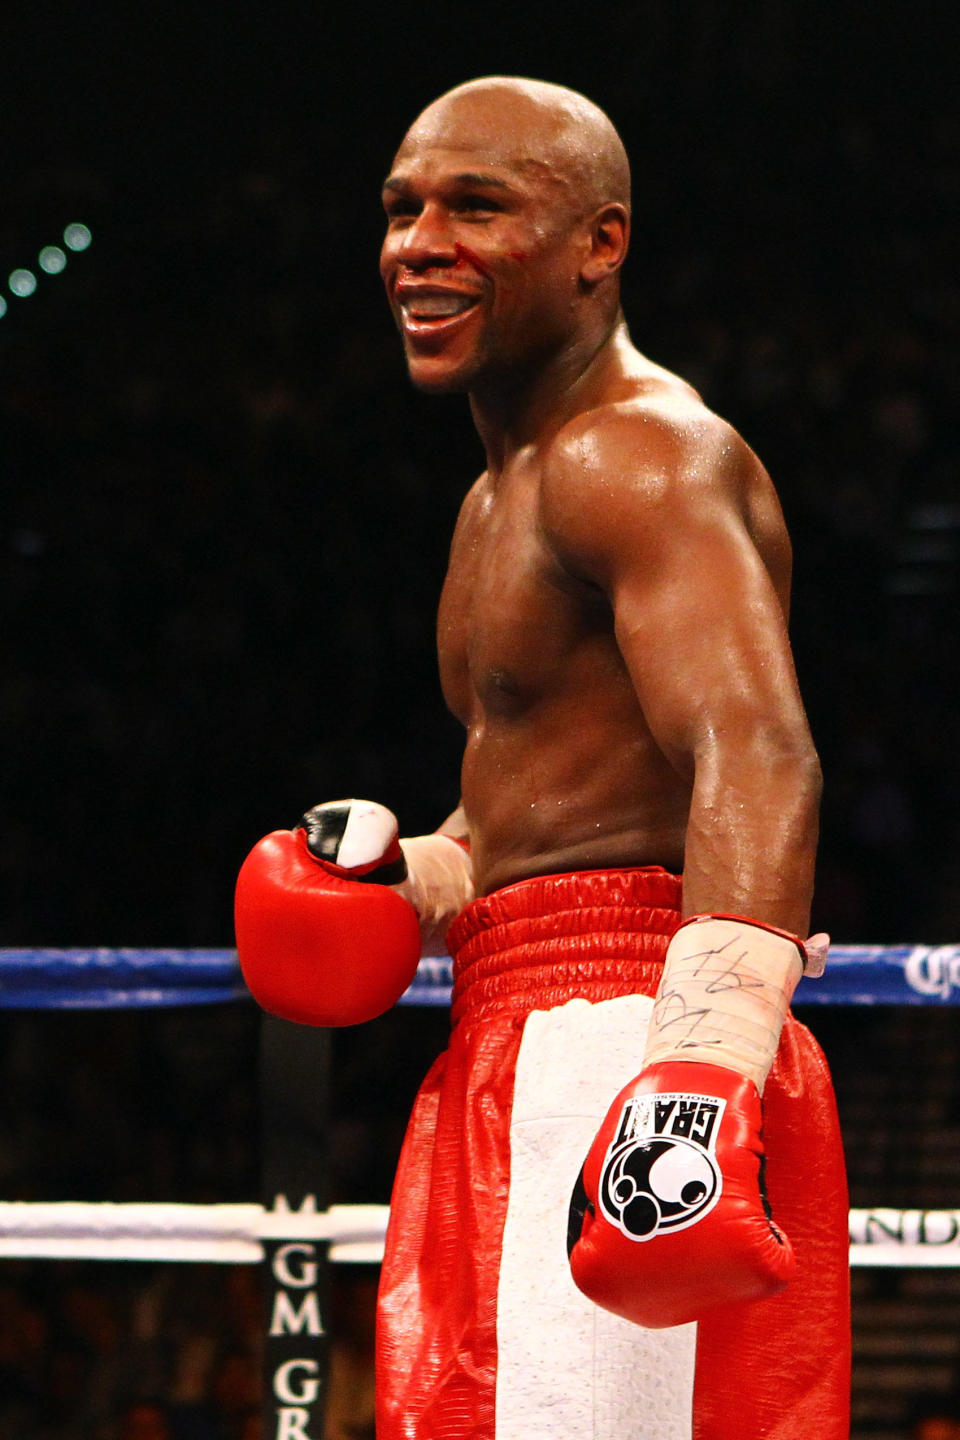 Boxing champion Floyd Mayweather Jr. <a href="http://www.huffingtonpost.com/2012/05/17/floyd-mayweather-gay-marriage-pacquiao-obama_n_1524155.html">tweeted his support for gay marriage</a>, backing up the President after Obama made his own endorsement announcement in May.   On the other hand, Mayweather’s rival, Manny Pacquiao, said <a href="http://www.huffingtonpost.com/2012/05/16/manny-pacquiao-gay-marriage-leviticus-examiner_n_1521747.html">he believes marriage is between a man and a woman</a>.